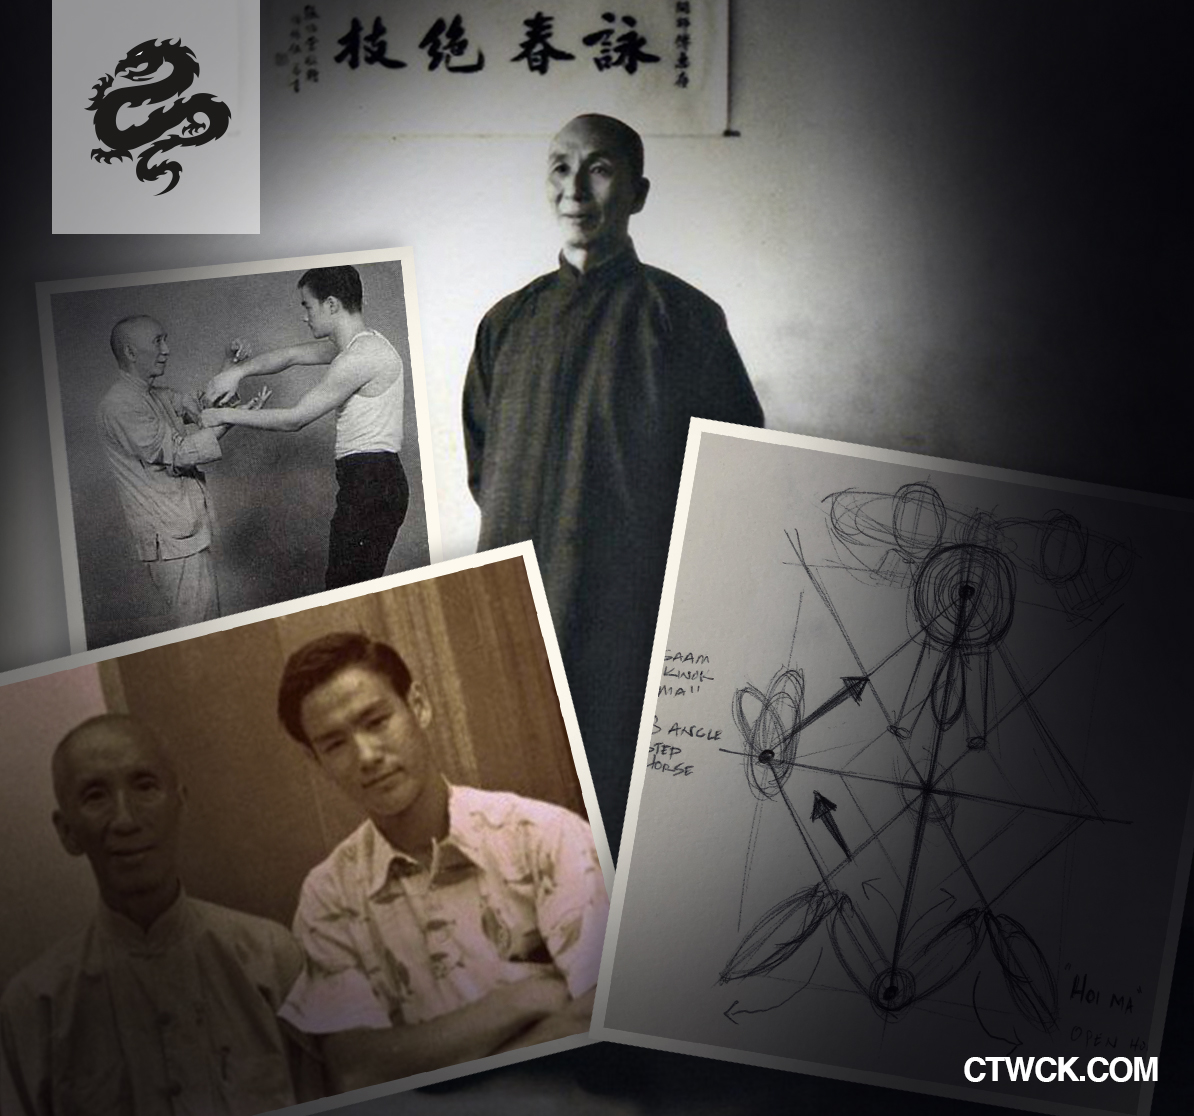 Yip Man Wing Chun Forms – Archival Footage Commentary